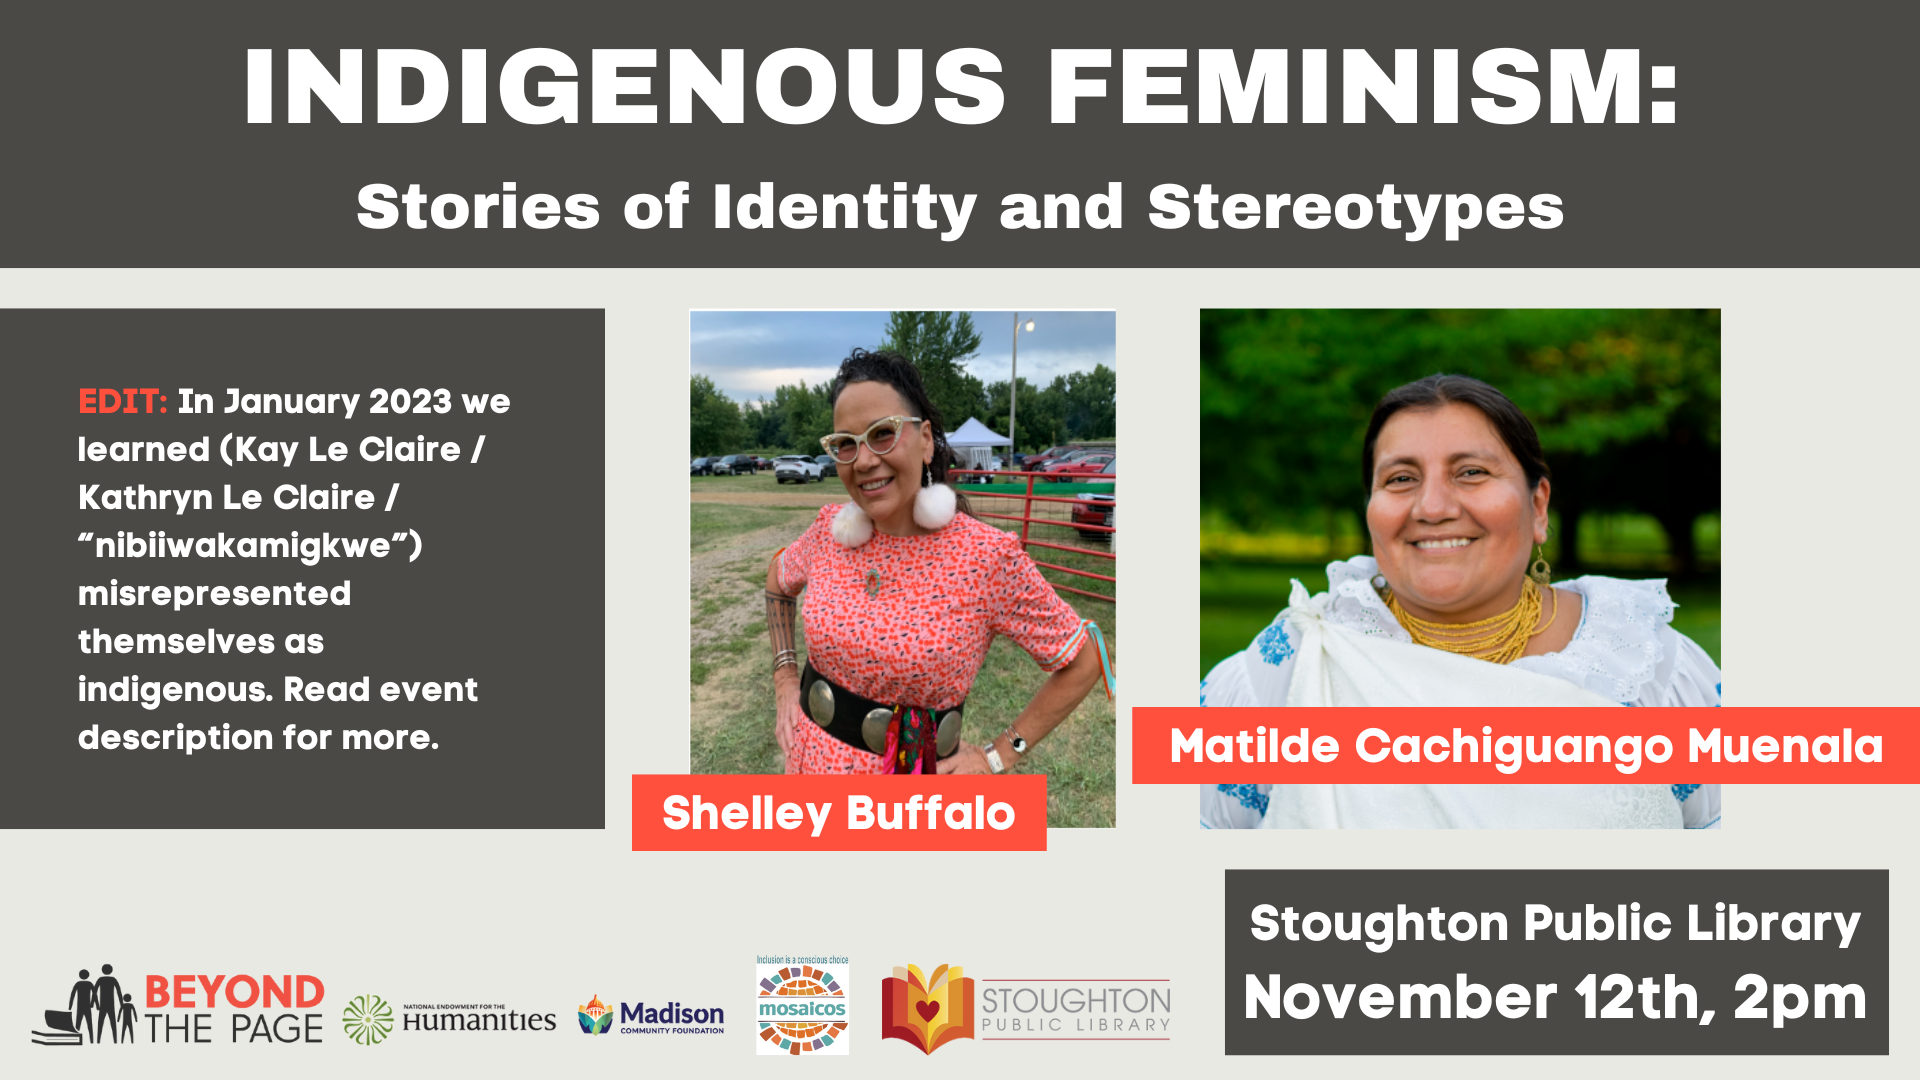 Indigenous Feminism: Stories of Identity and Stereotypes. EDIT: In January 2023 we learned (Kay Le Claire / Kathryn Le Claire / “nibiiwakamigkwe”) misrepresented themselves as indigenous. Read event description for more. Shelley Buffalo. Matilde Cachiguango Muenala. Stoughton Public Library. November 12th, 2pm. Logos: Beyond the Page, National Endowment for the Humanities, Madison Community Foundation, Mosaicos, Stoughton Public Library.